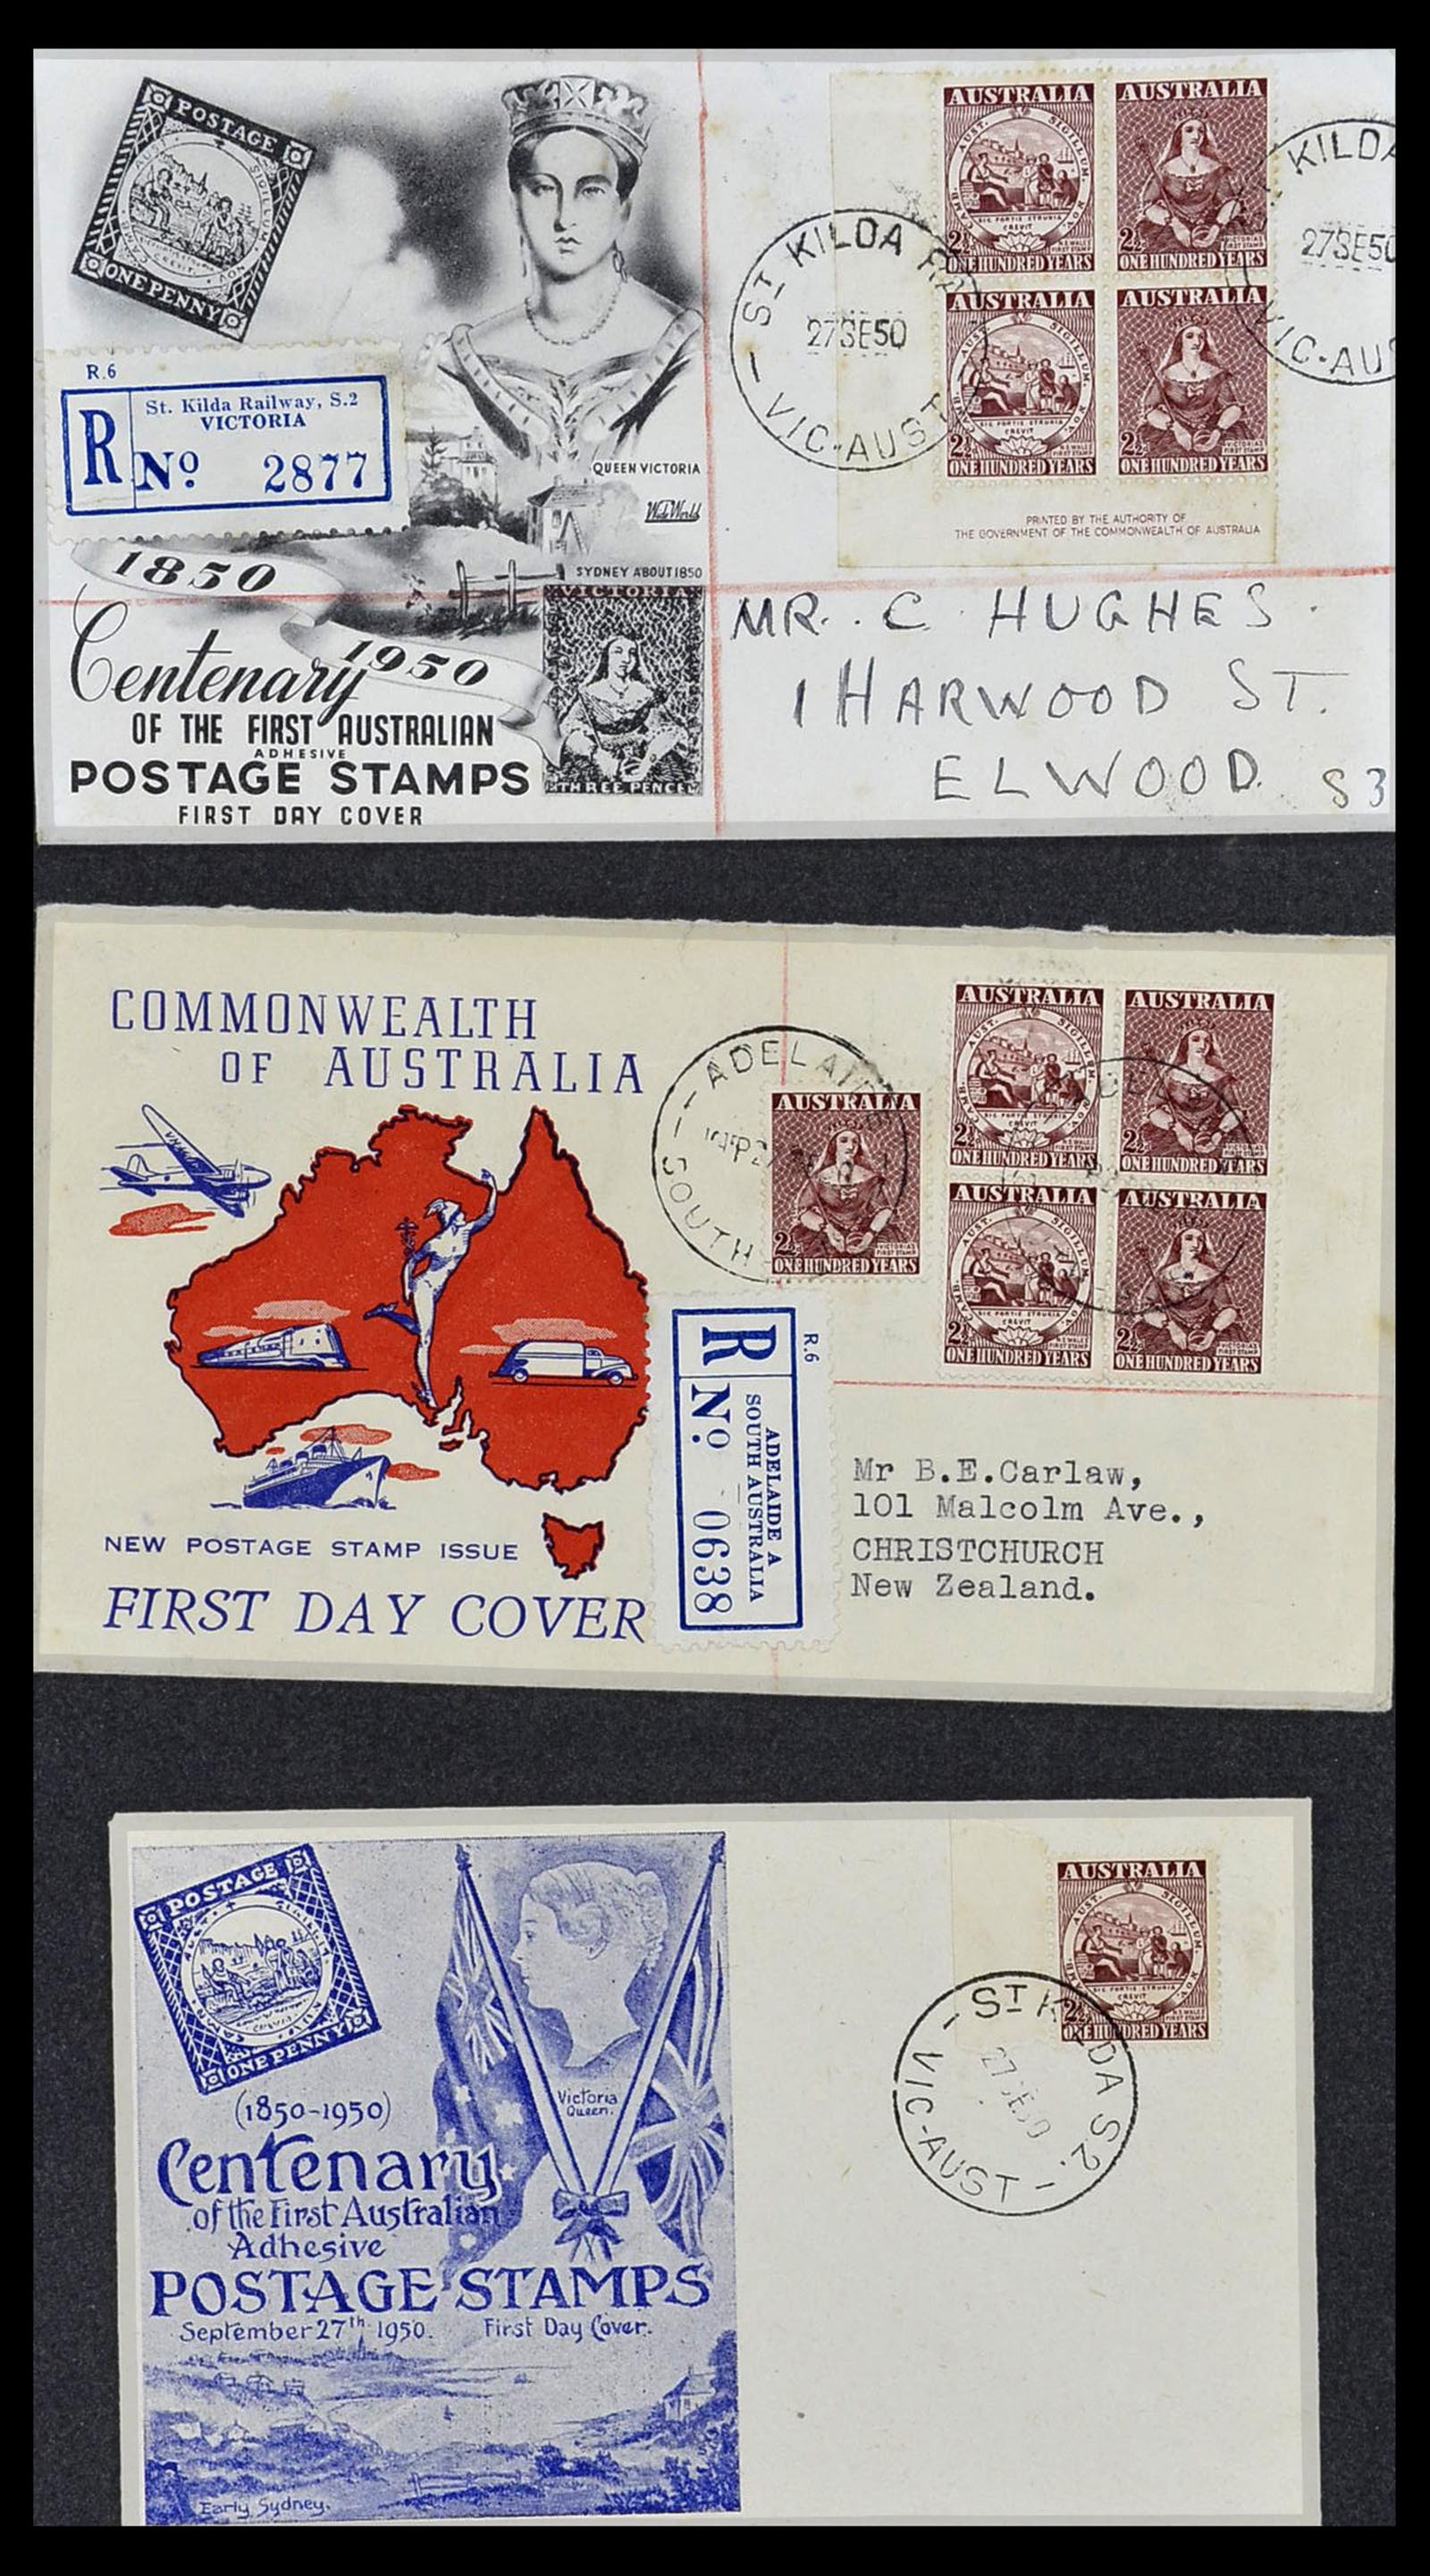 34118 077 - Stamp collection 34118 Australia FDC's 1944-1952.